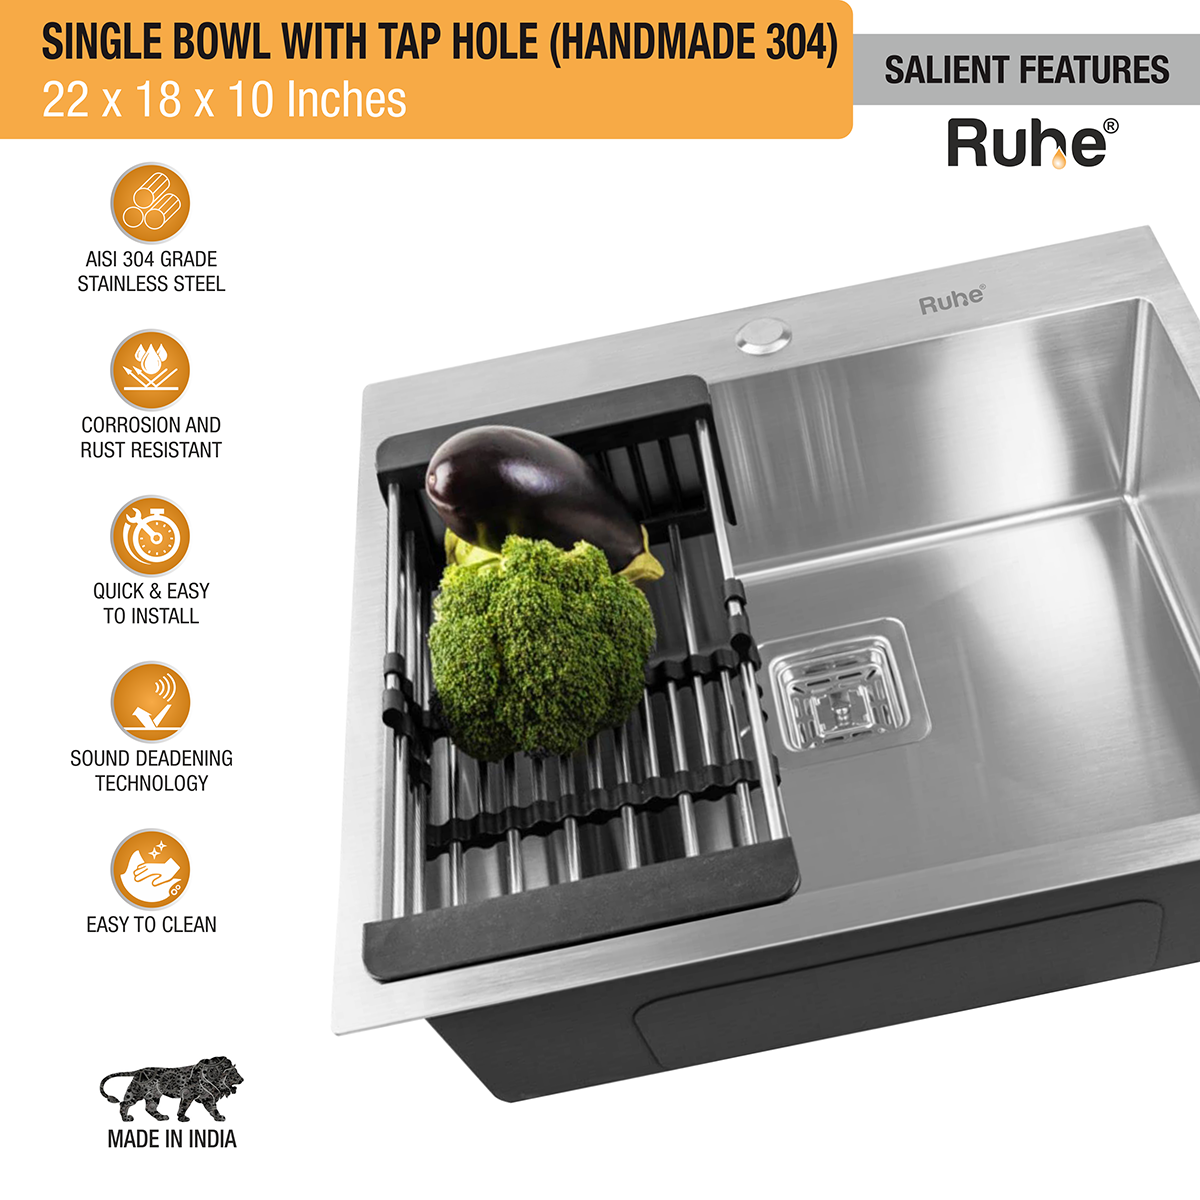 Handmade Single Bowl 304-Grade Kitchen Sink (22 x 18 x 10 Inches) with Tap Hole features and benefits